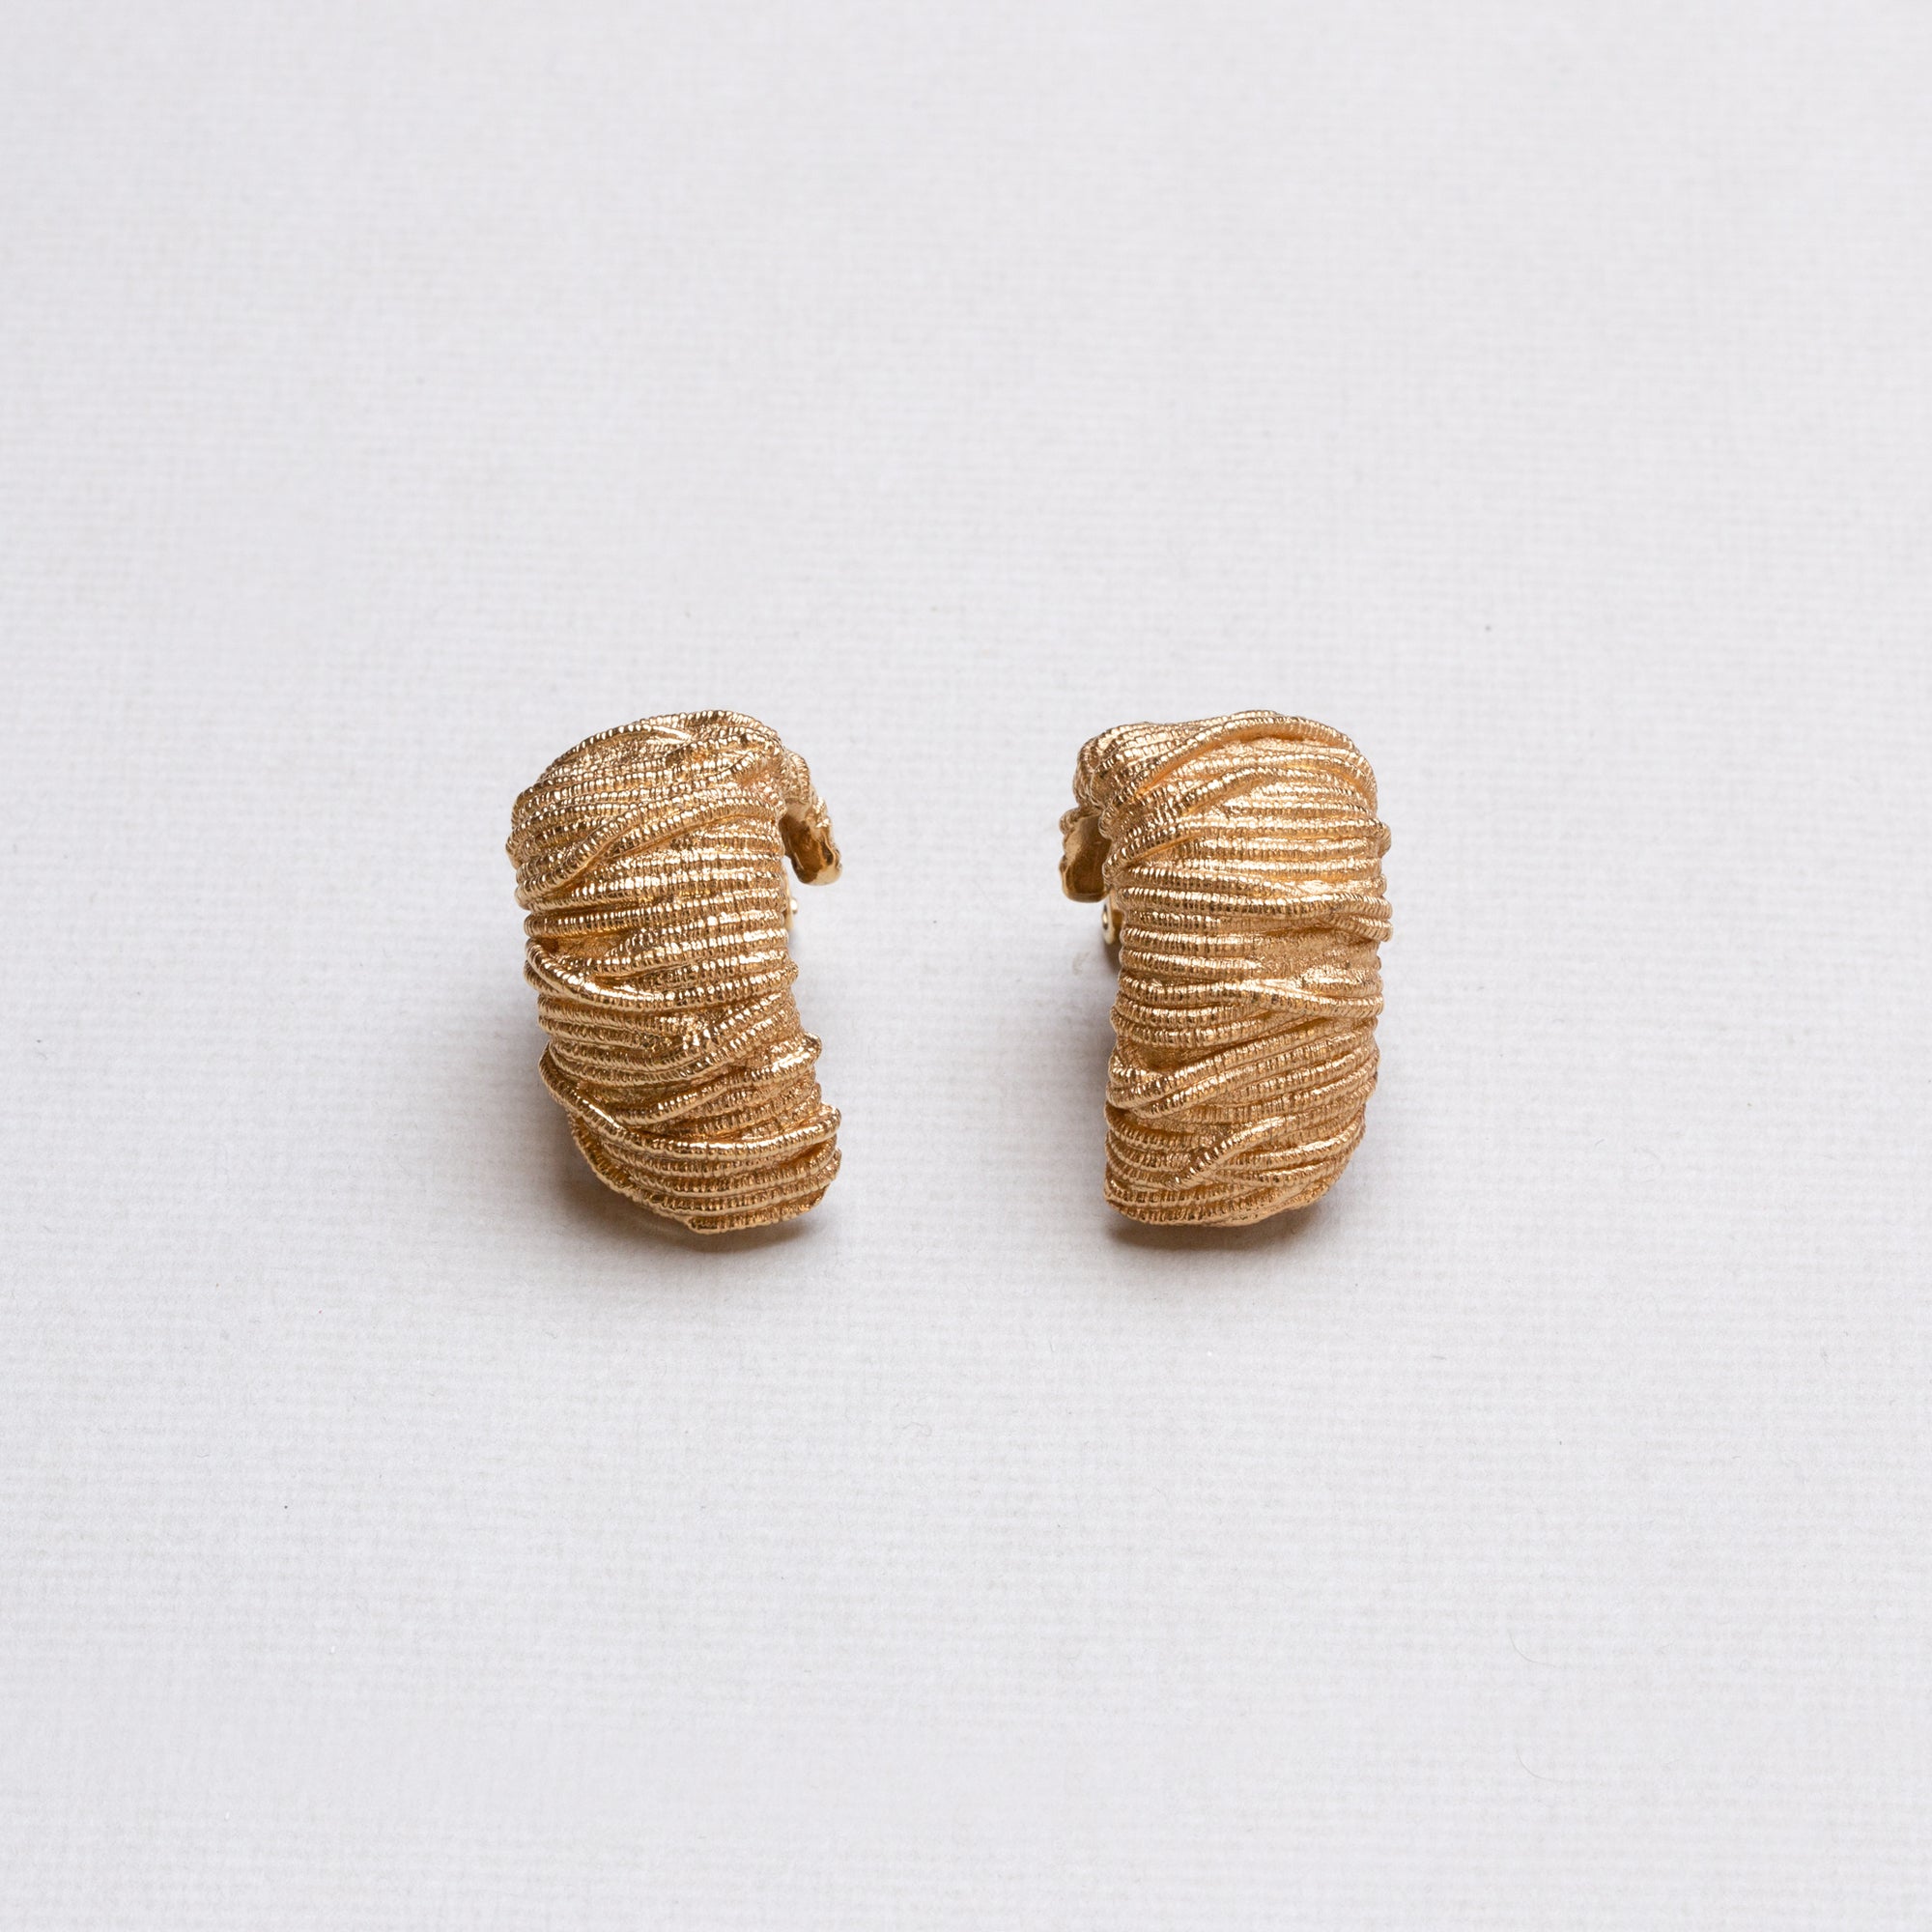 Vintage Christian Dior Textured Gold Clip-on Earrings